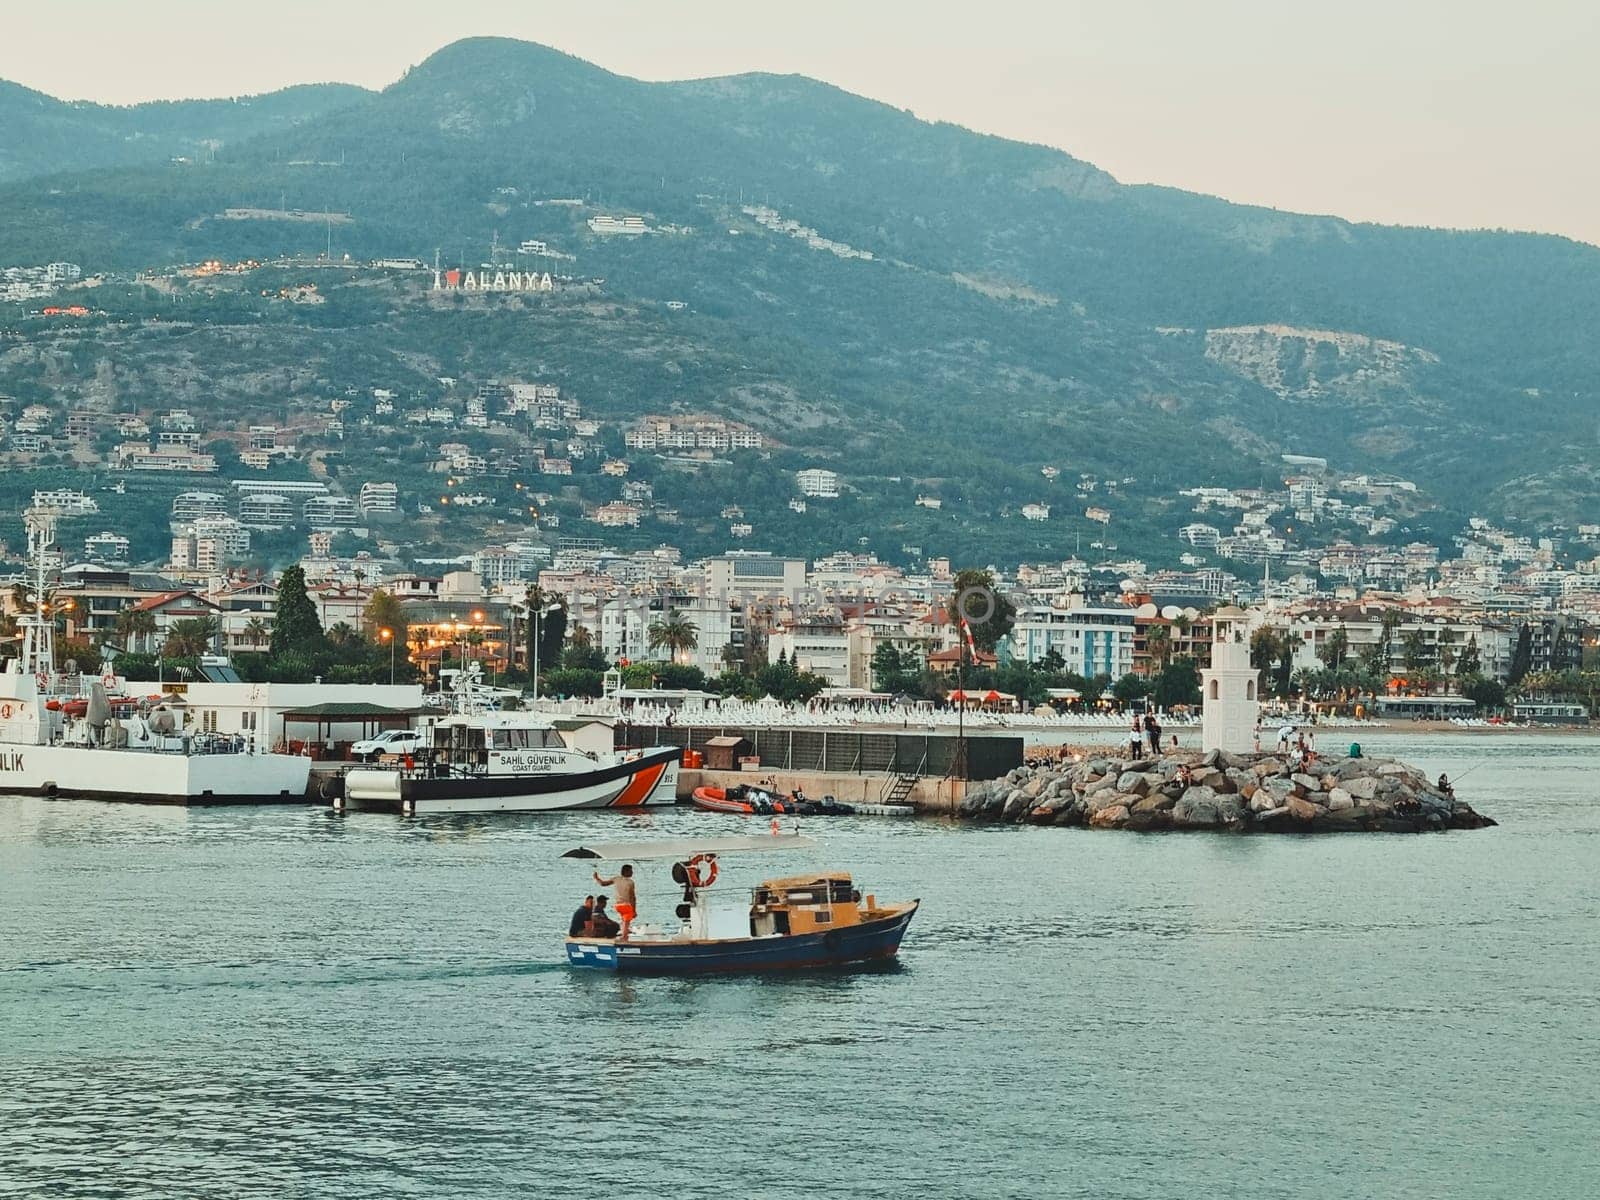 View of the city of Alanya from the sea, mountains, inscription I love Alanya, boats. Alanya, Turkey, August 5, 2022